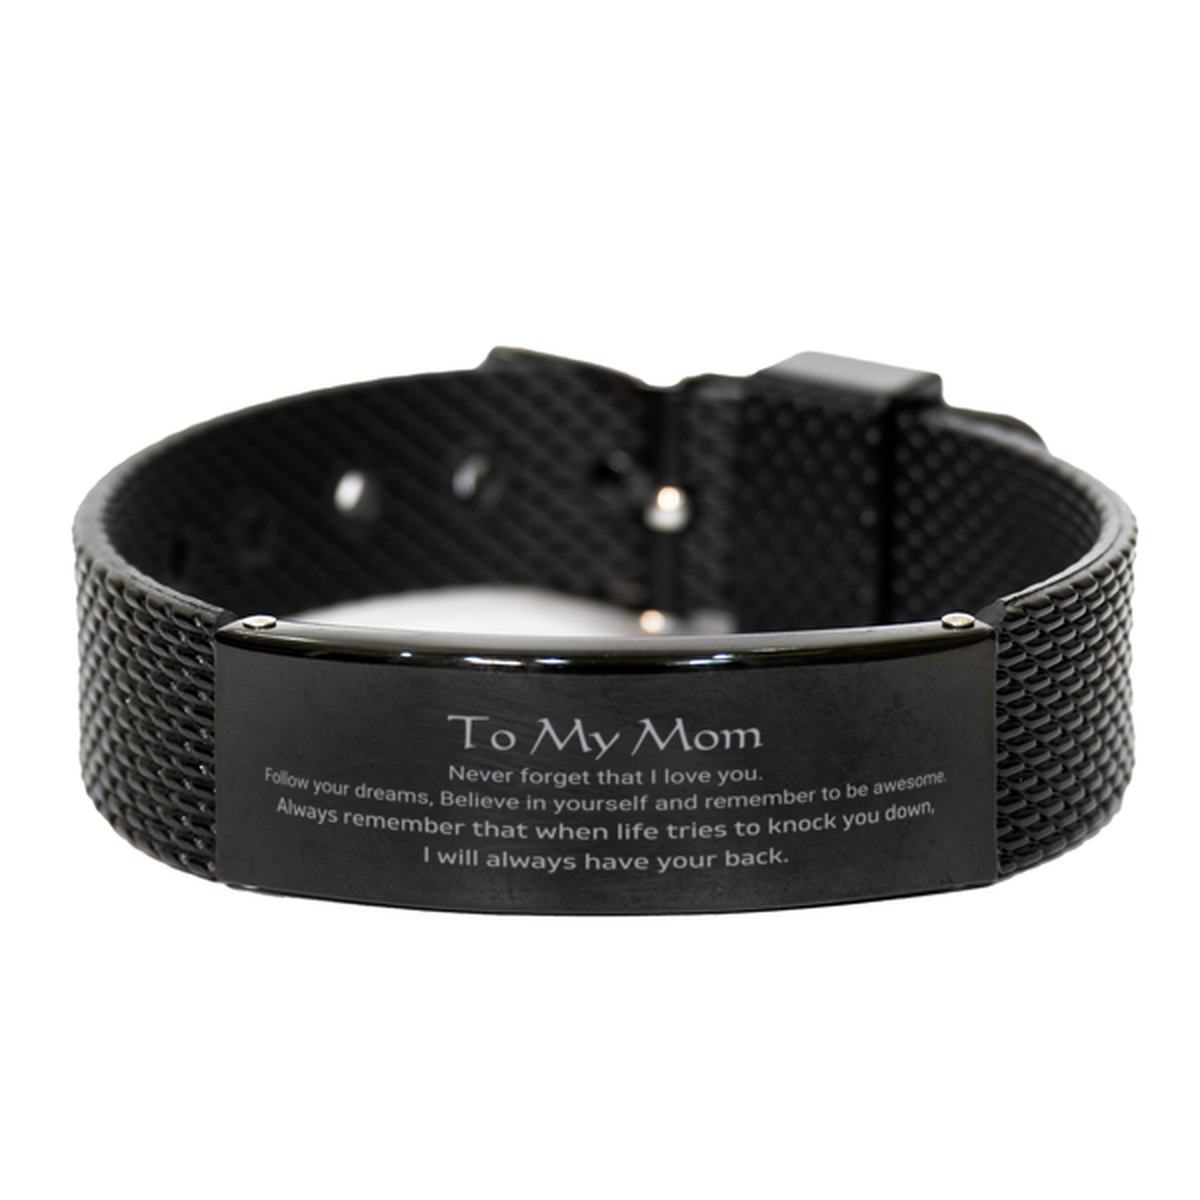 Inspirational Gifts for Mom, Follow your dreams, Believe in yourself, Mom Black Shark Mesh Bracelet, Birthday Christmas Unique Gifts For Mom